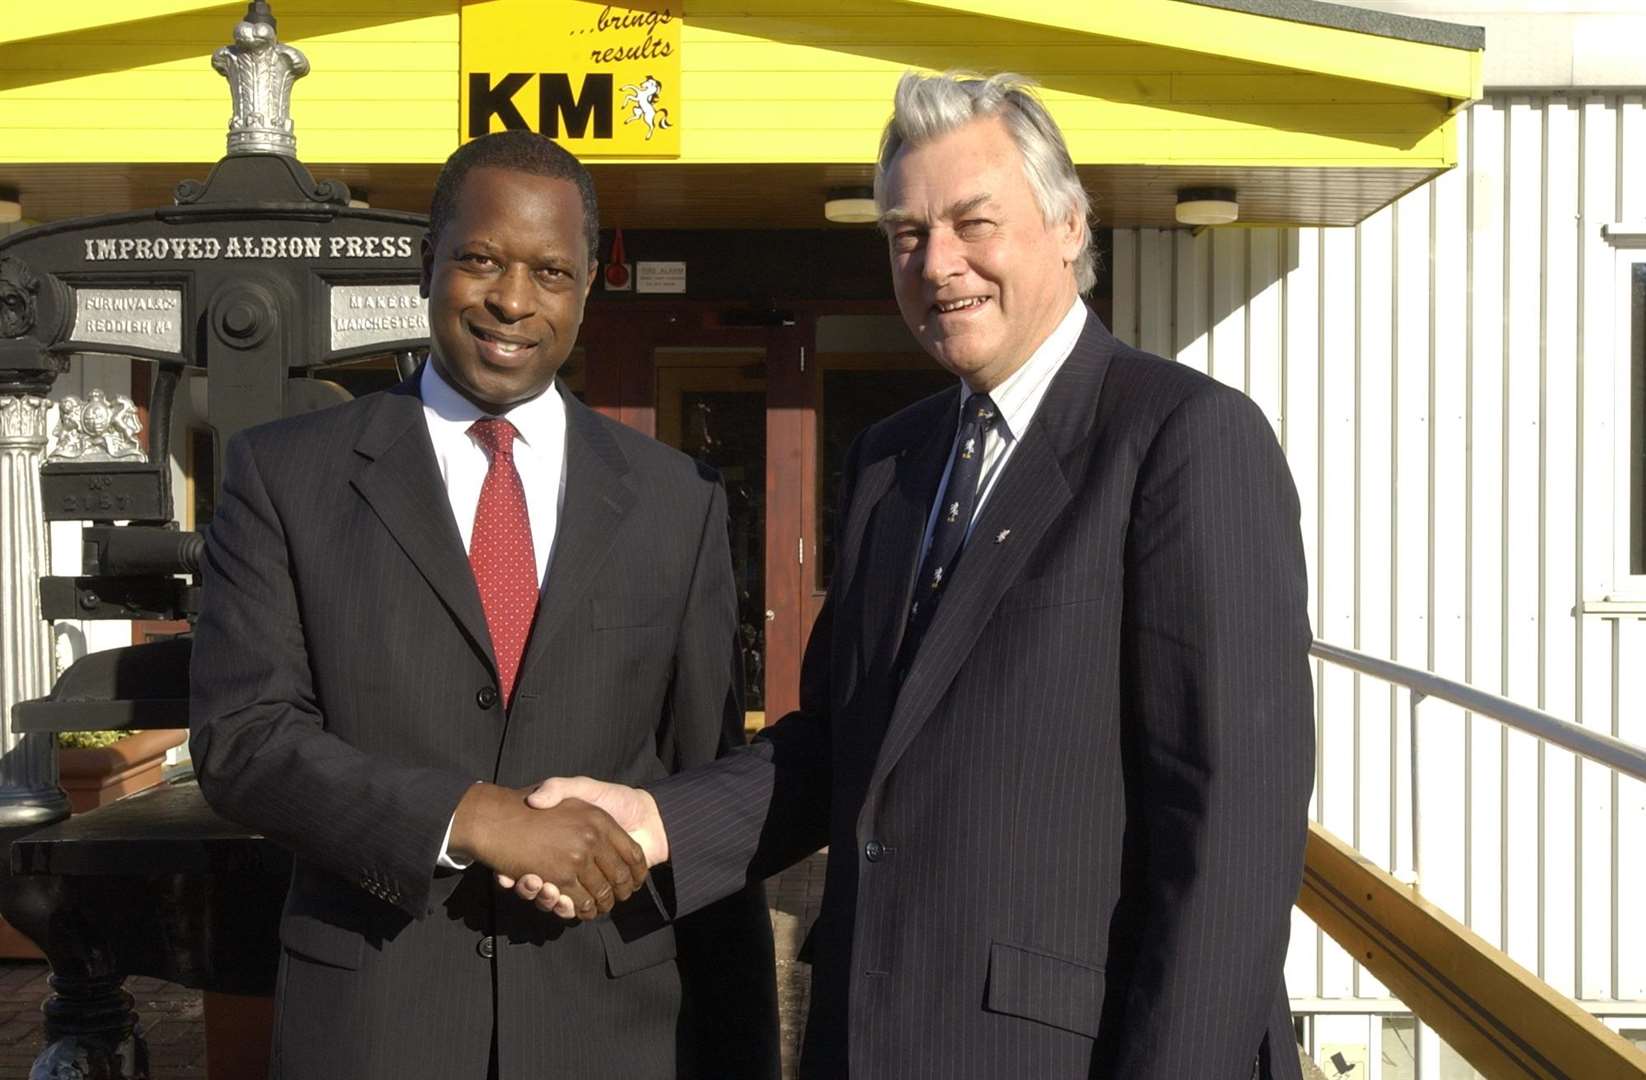 As Chief Constable of Kent, Michael Fuller meets the late Edwin Boorman, the then chairman of what is now KM Media Group